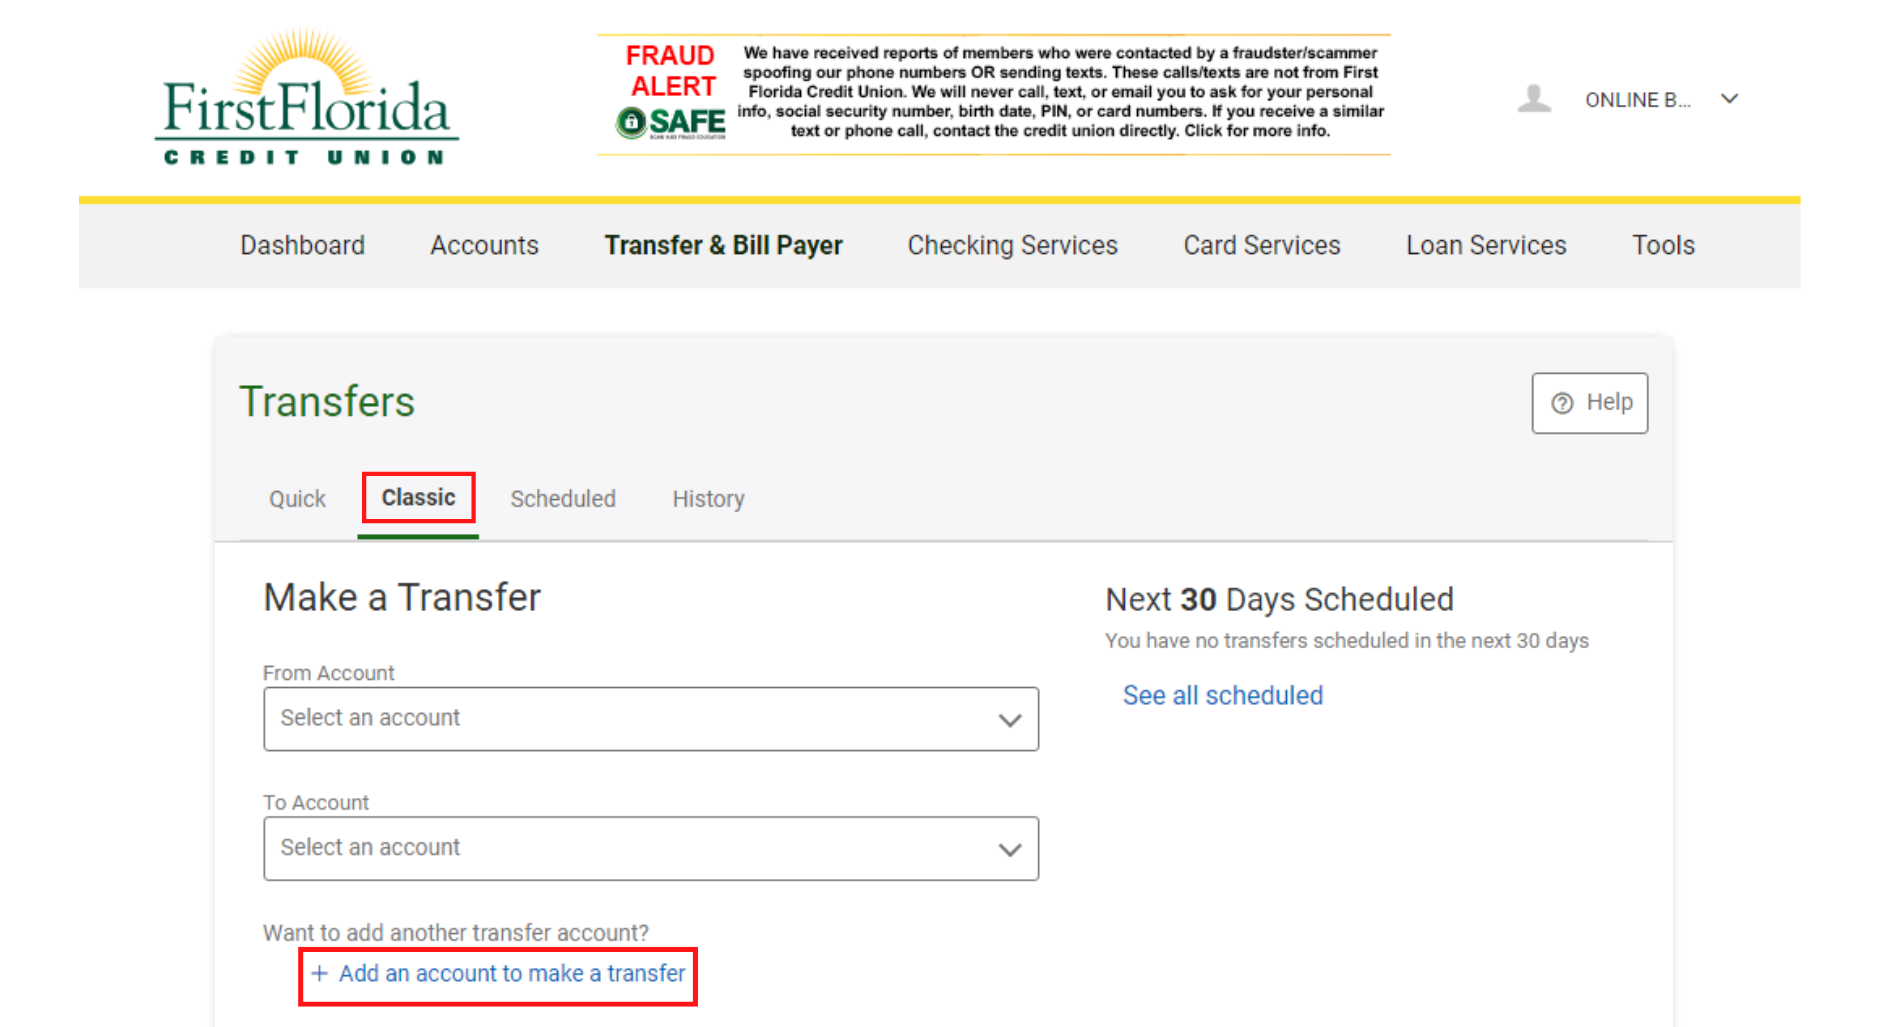 Screen capture showing classic transfer option and add an account to make a transfer option